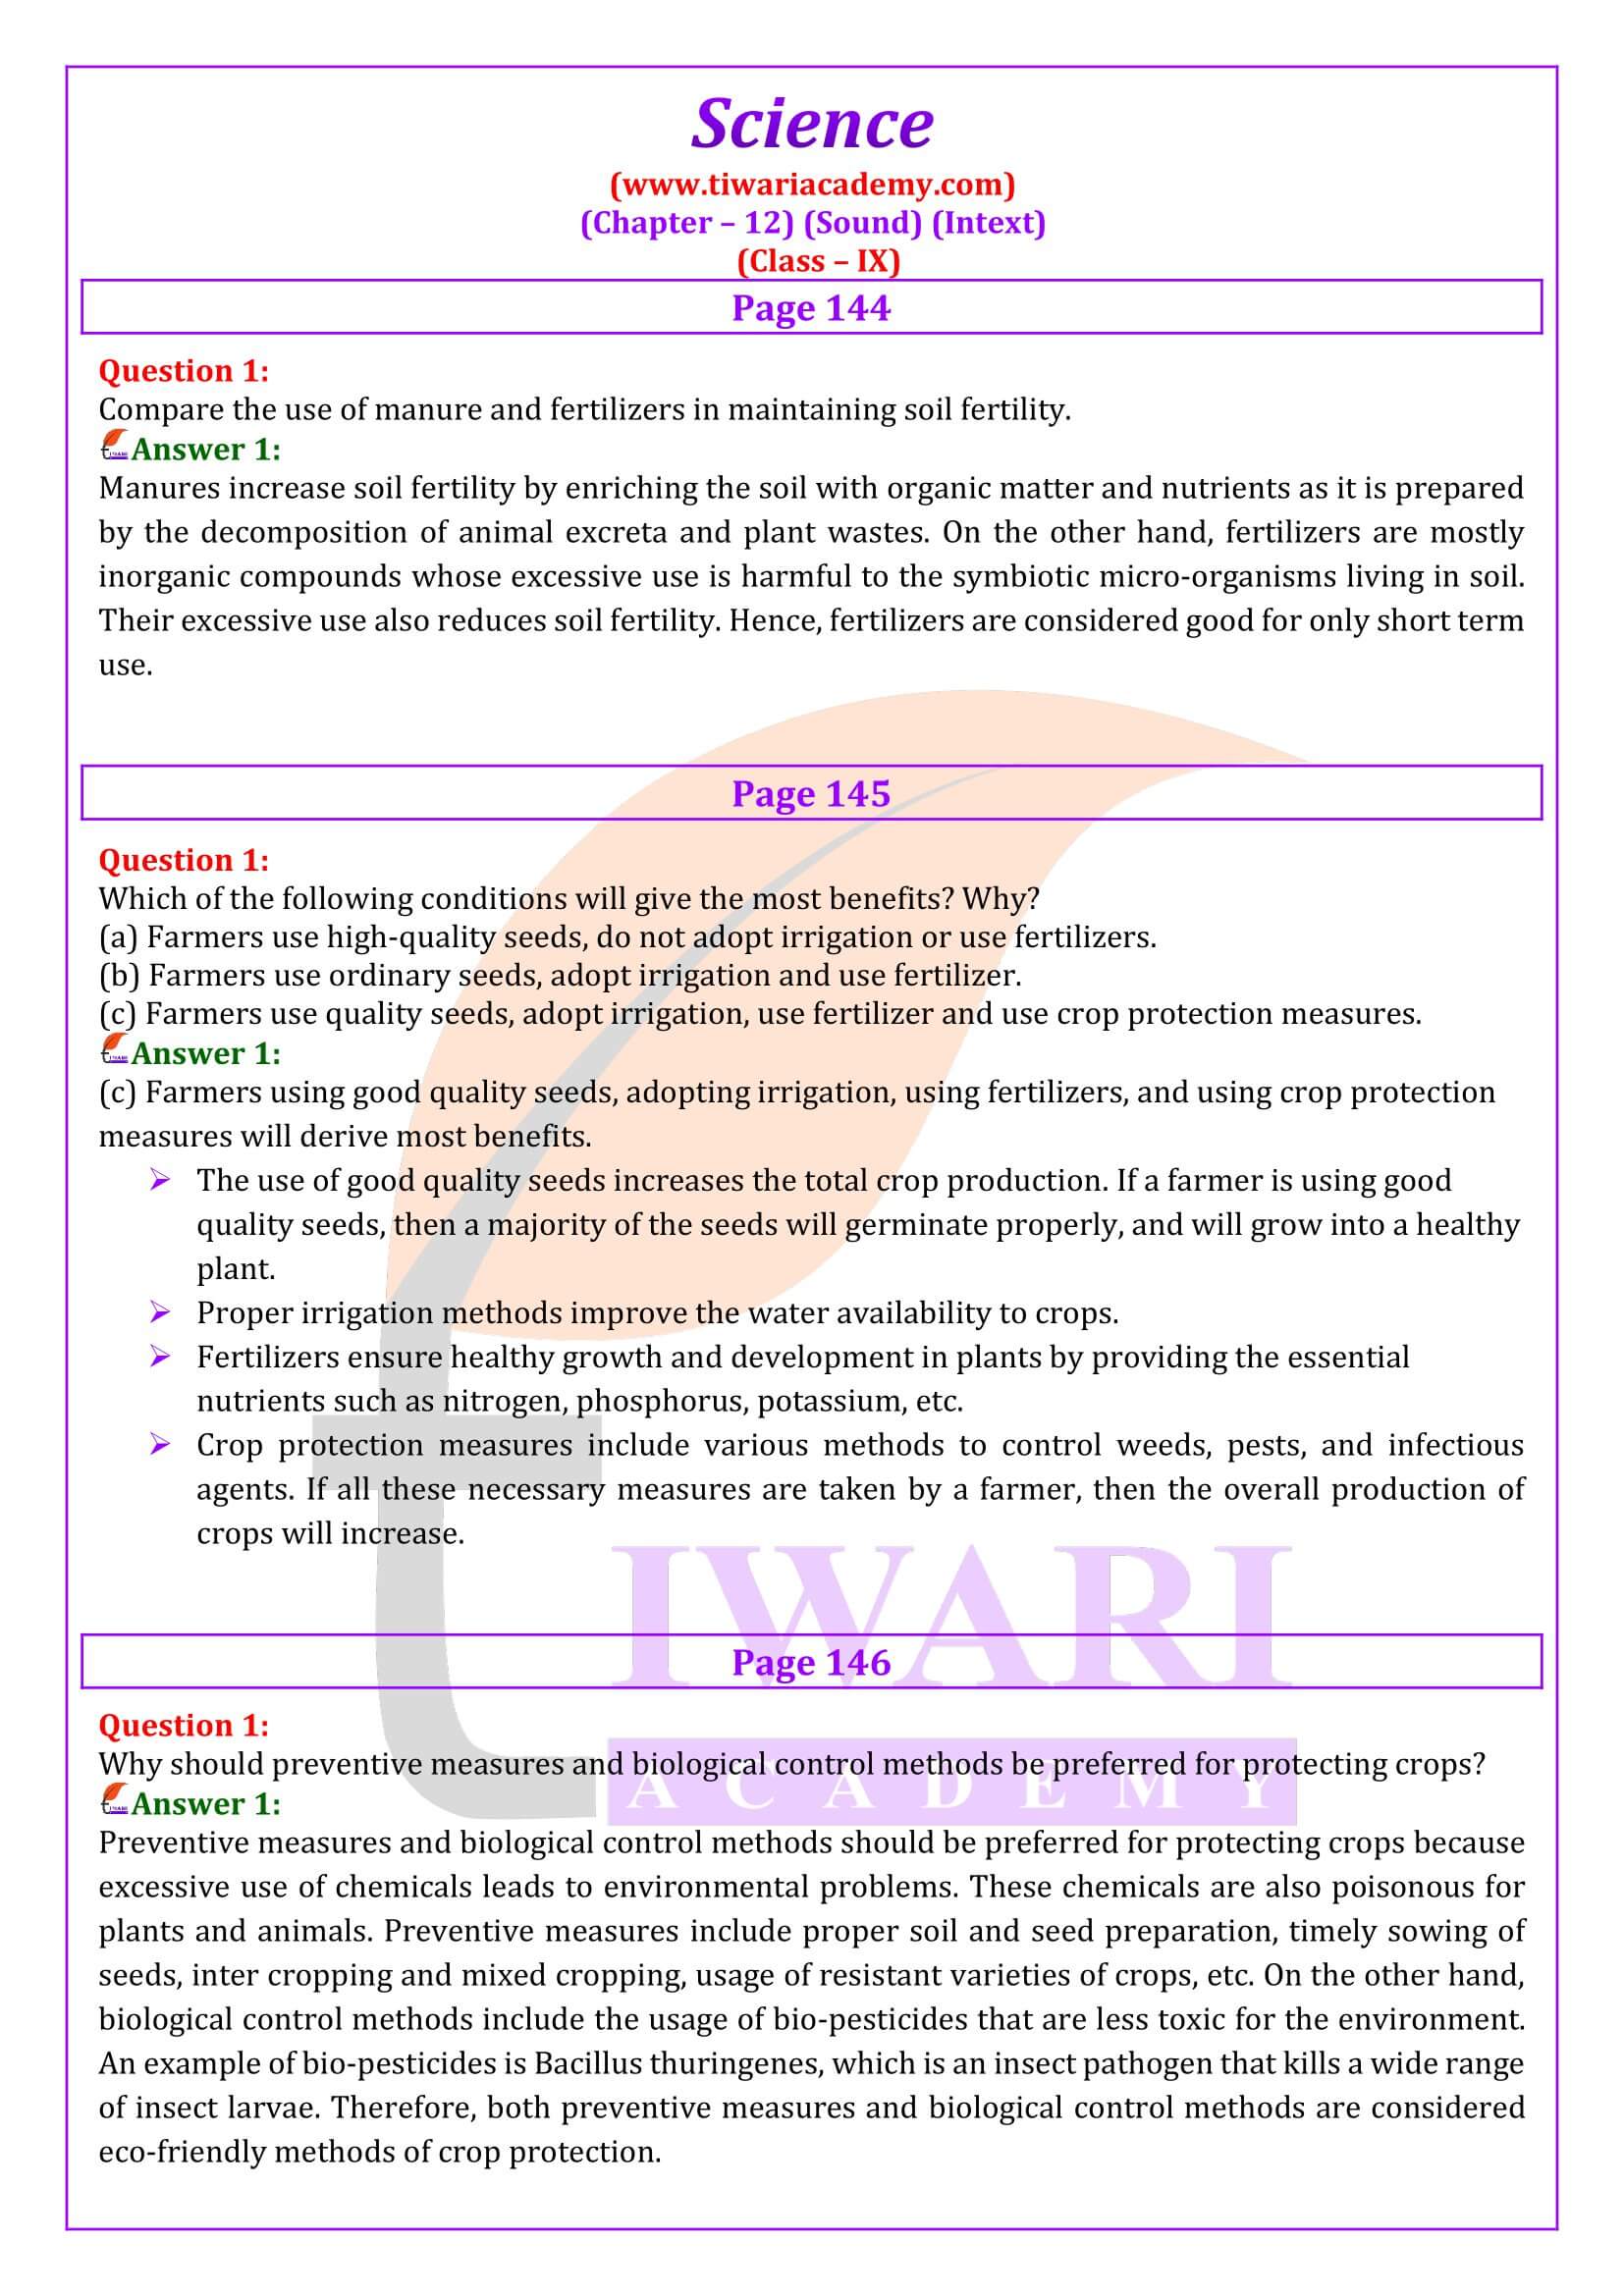 NCERT Solutions for Class 9 Science Chapter 12 in English Medium